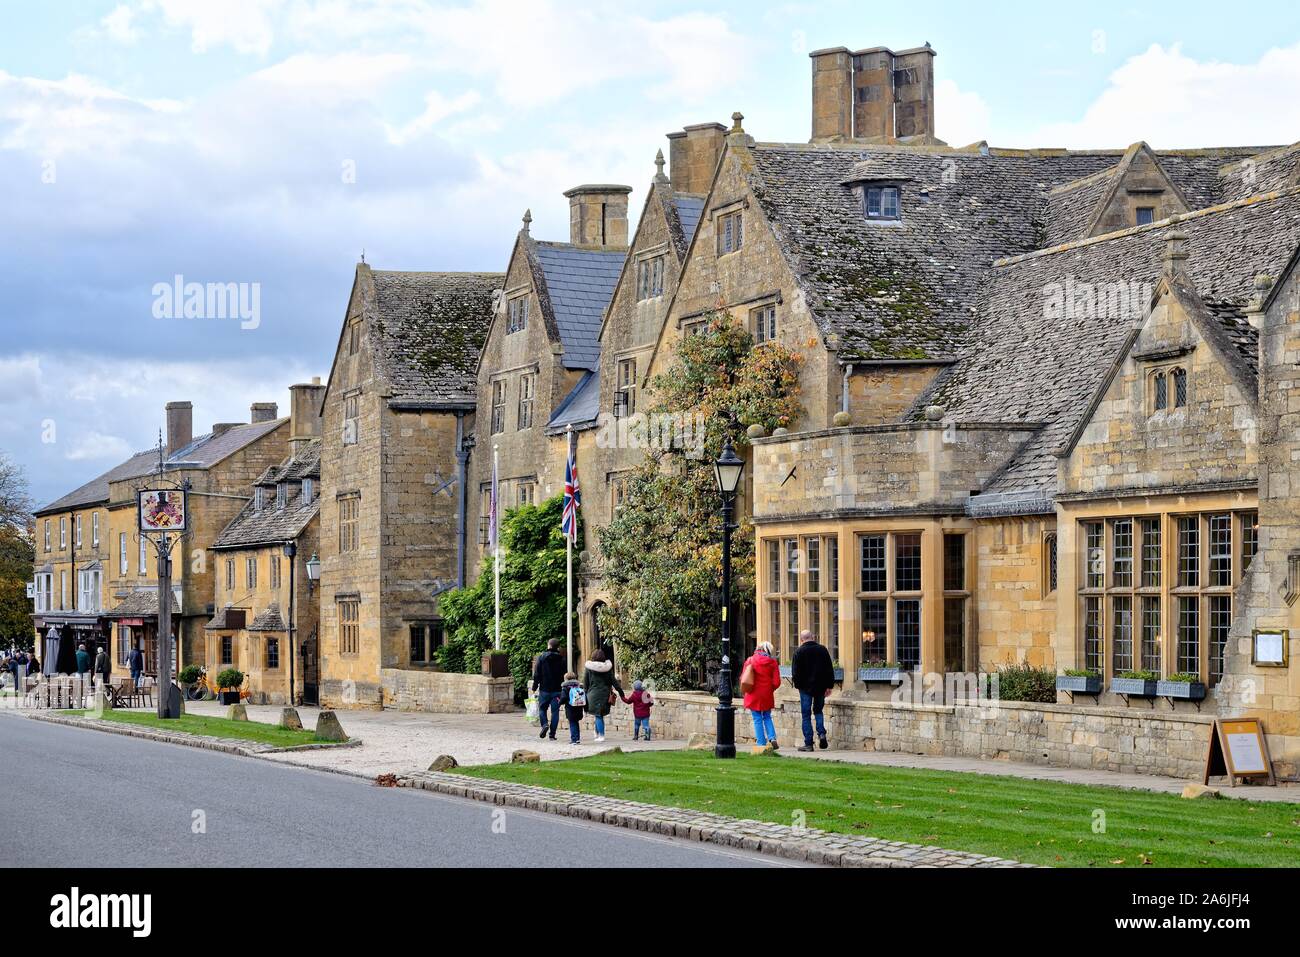 Exterior of the Lygon Arms 16th century coaching hotel, High Street Broadway Worcestershire England UK Stock Photo